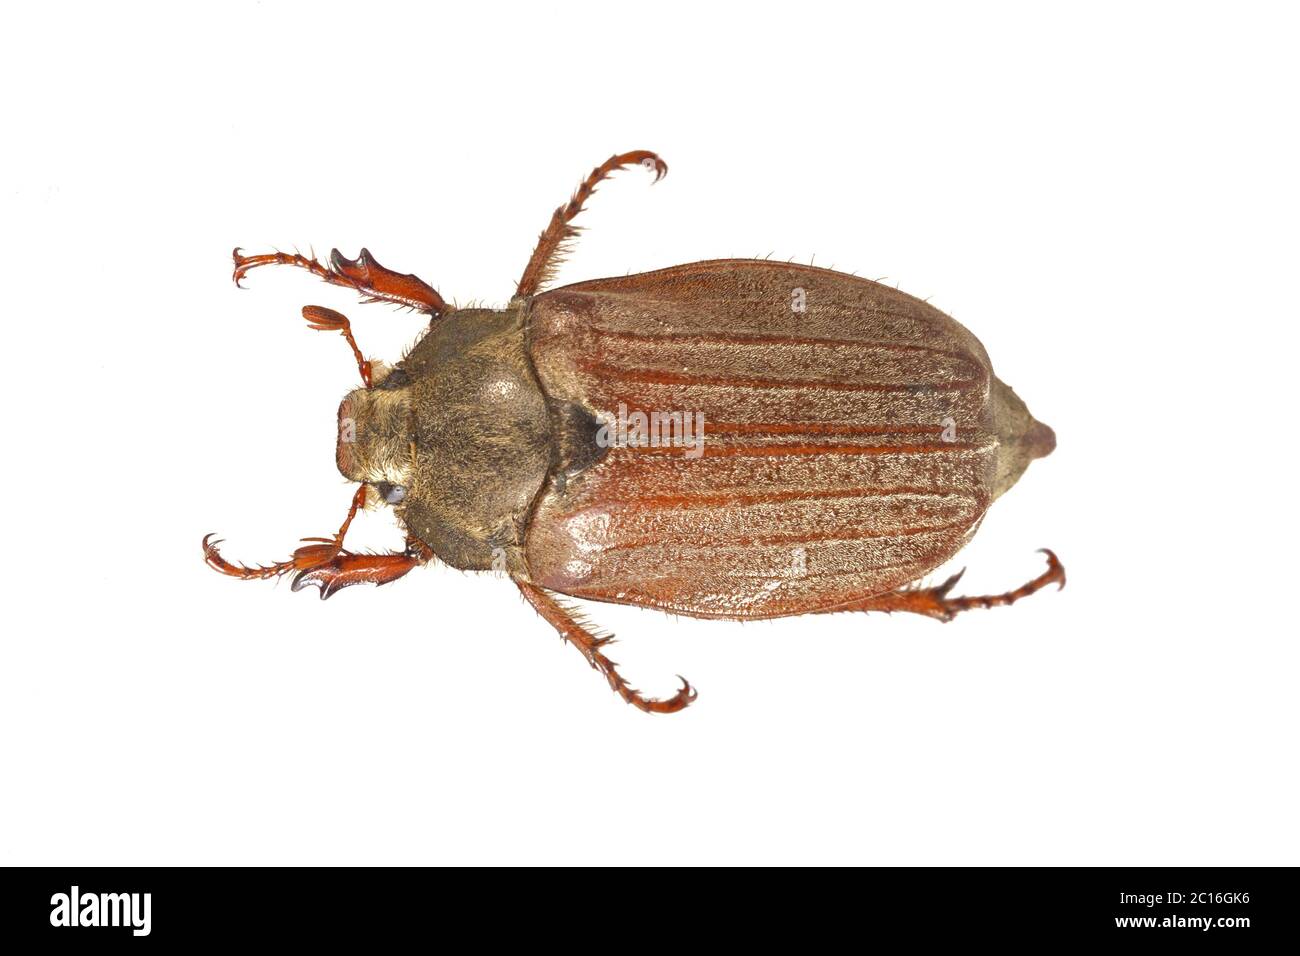 Cockchafer or May bug (Melolontha melolontha) on a white background Stock Photo